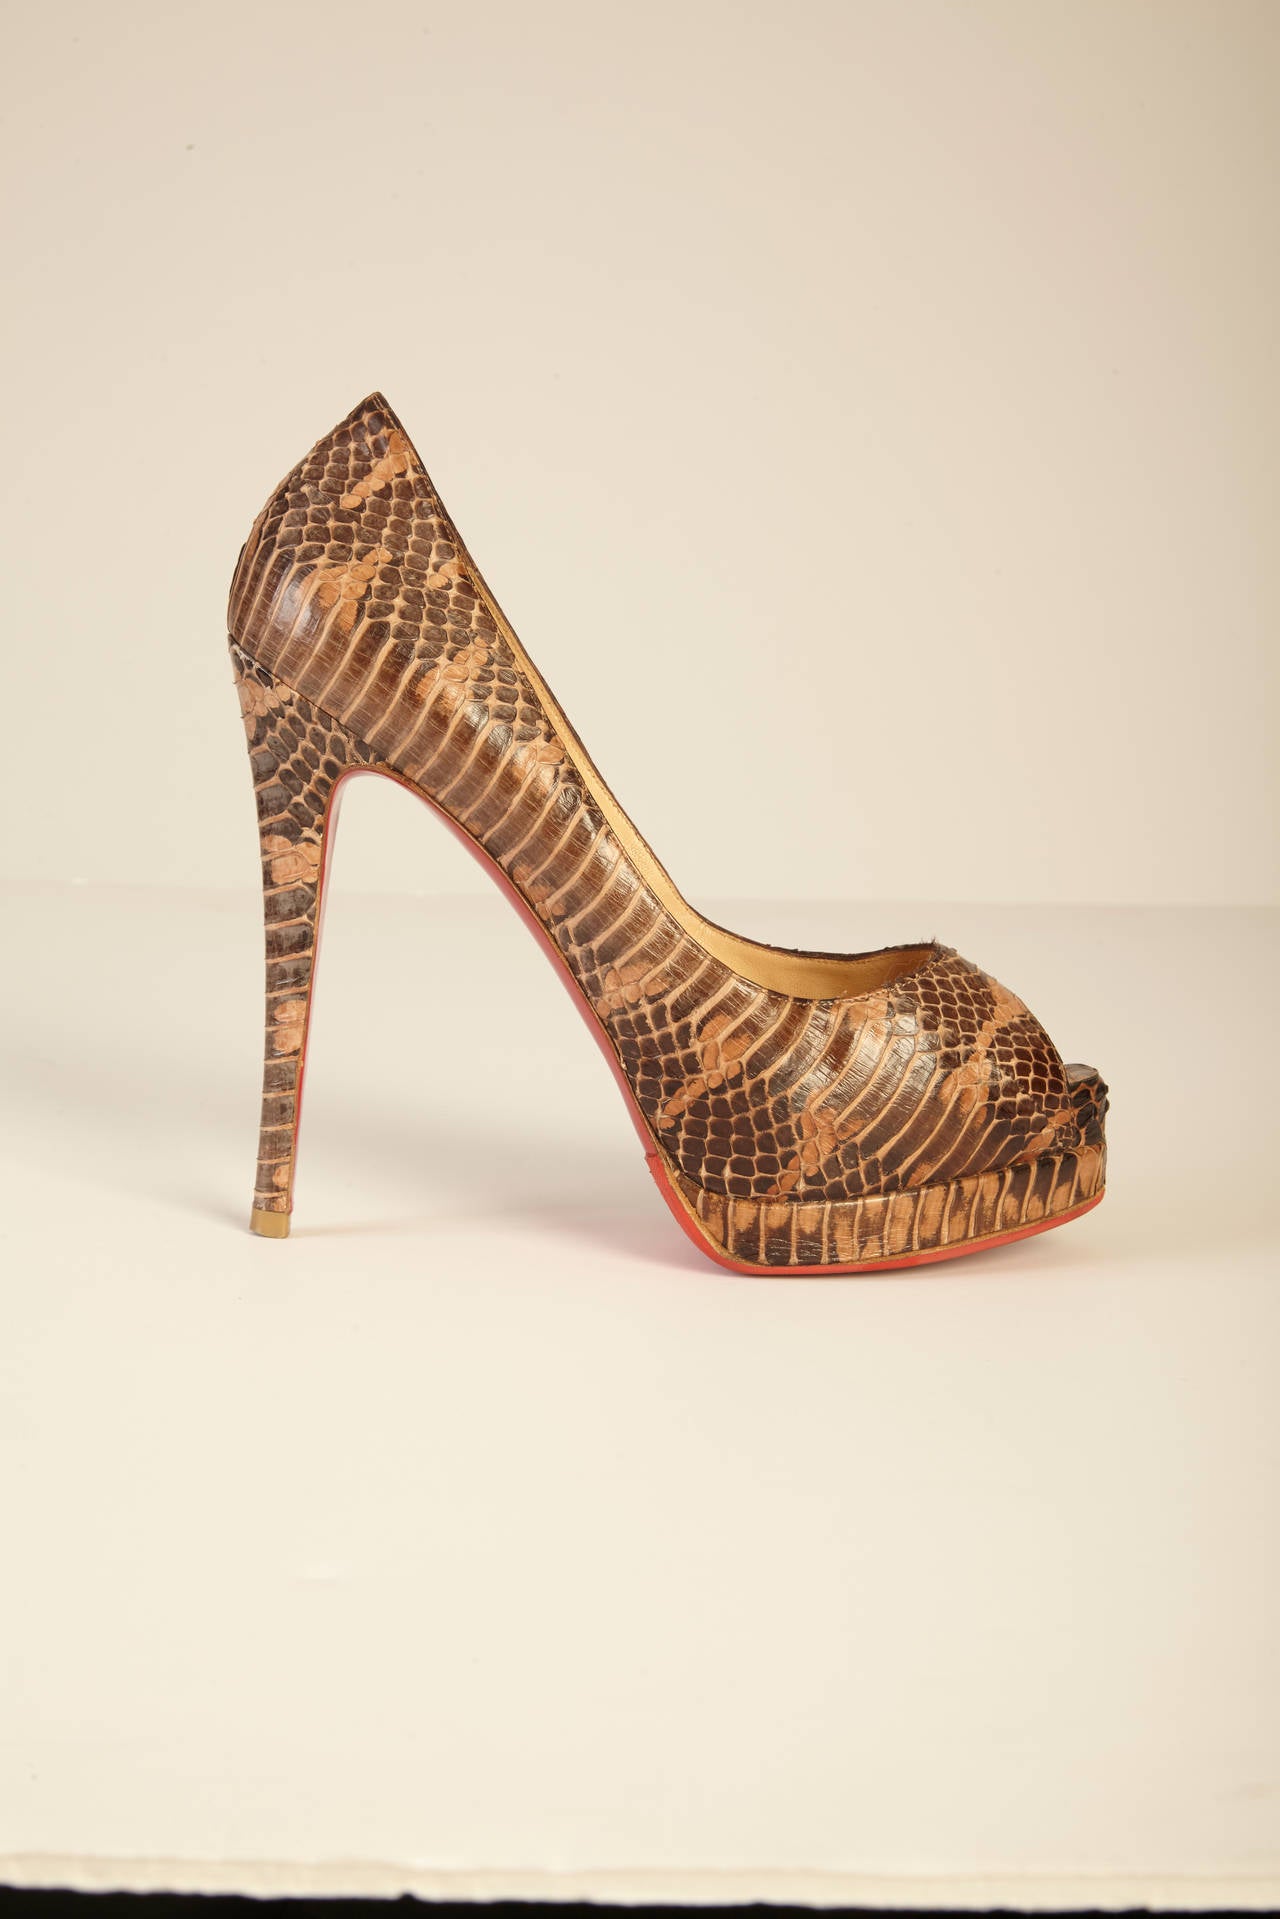 Sleek, sophisticated, and fierce - all in one pair of shoes! These gorgeous, python pumps will add a dash of beauty and excitement to any simple wardrobe, and are certainly the ideal combination of edge and classiness. Bottom of shoe has been